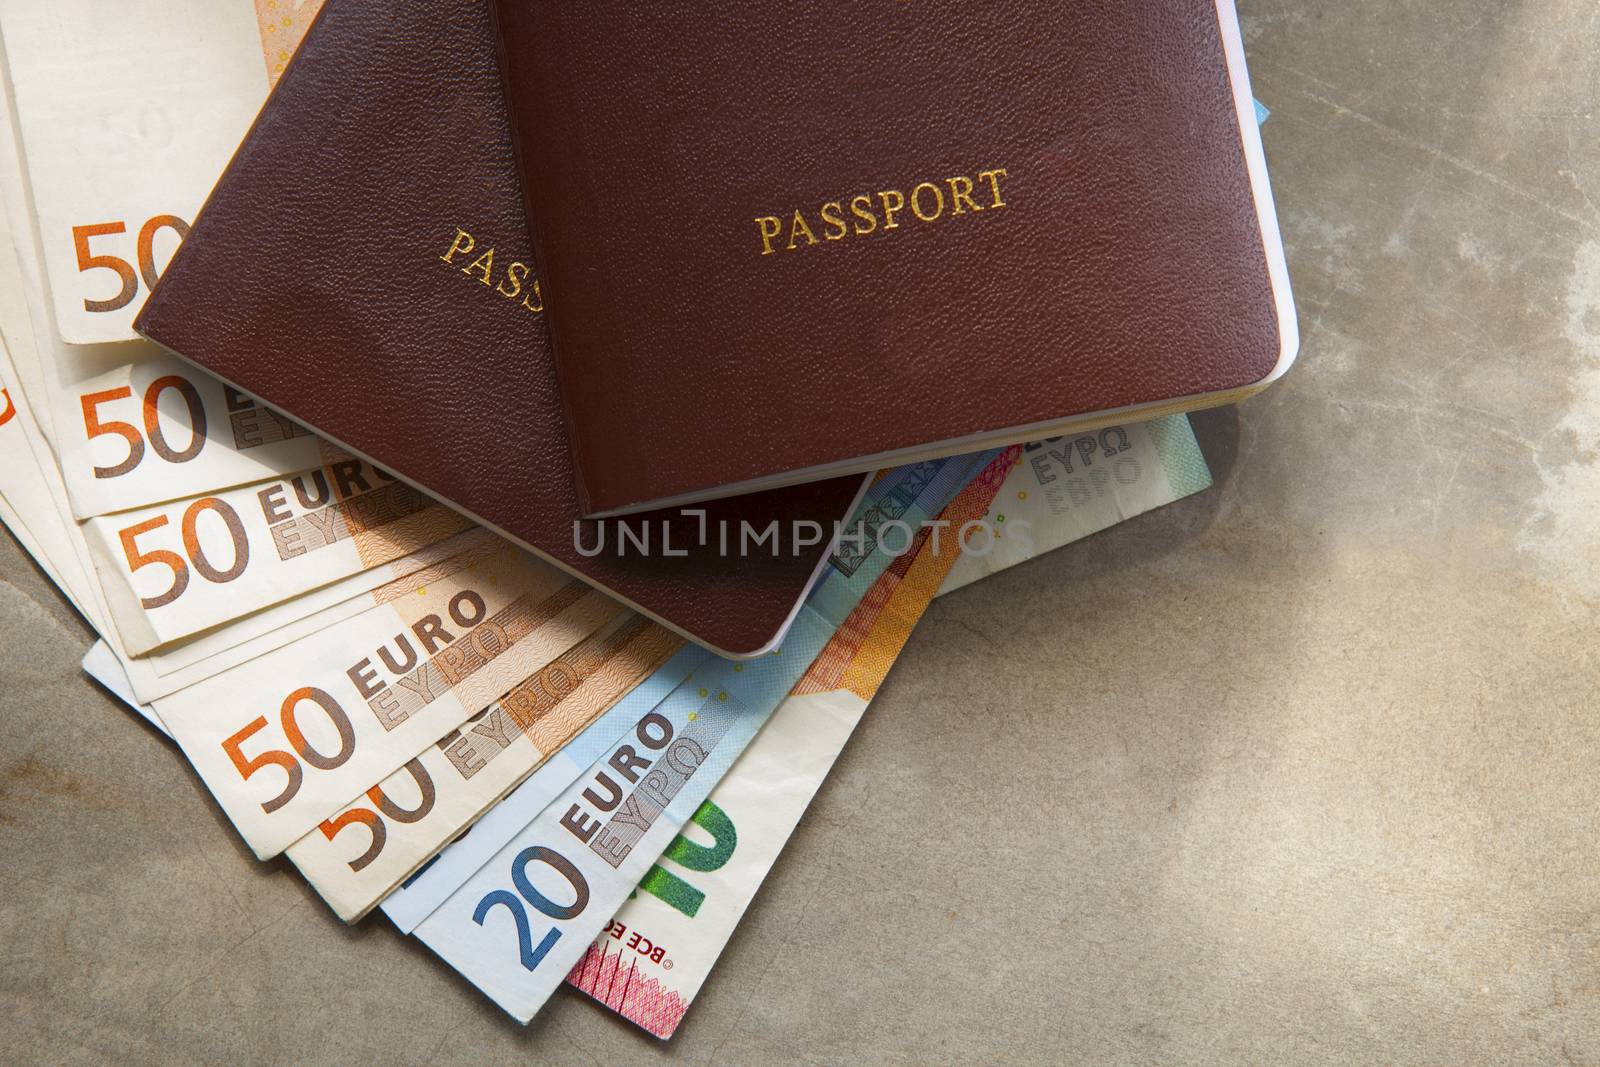 red passport book cover and euro banknote on earth tone backgrou by khunaspix